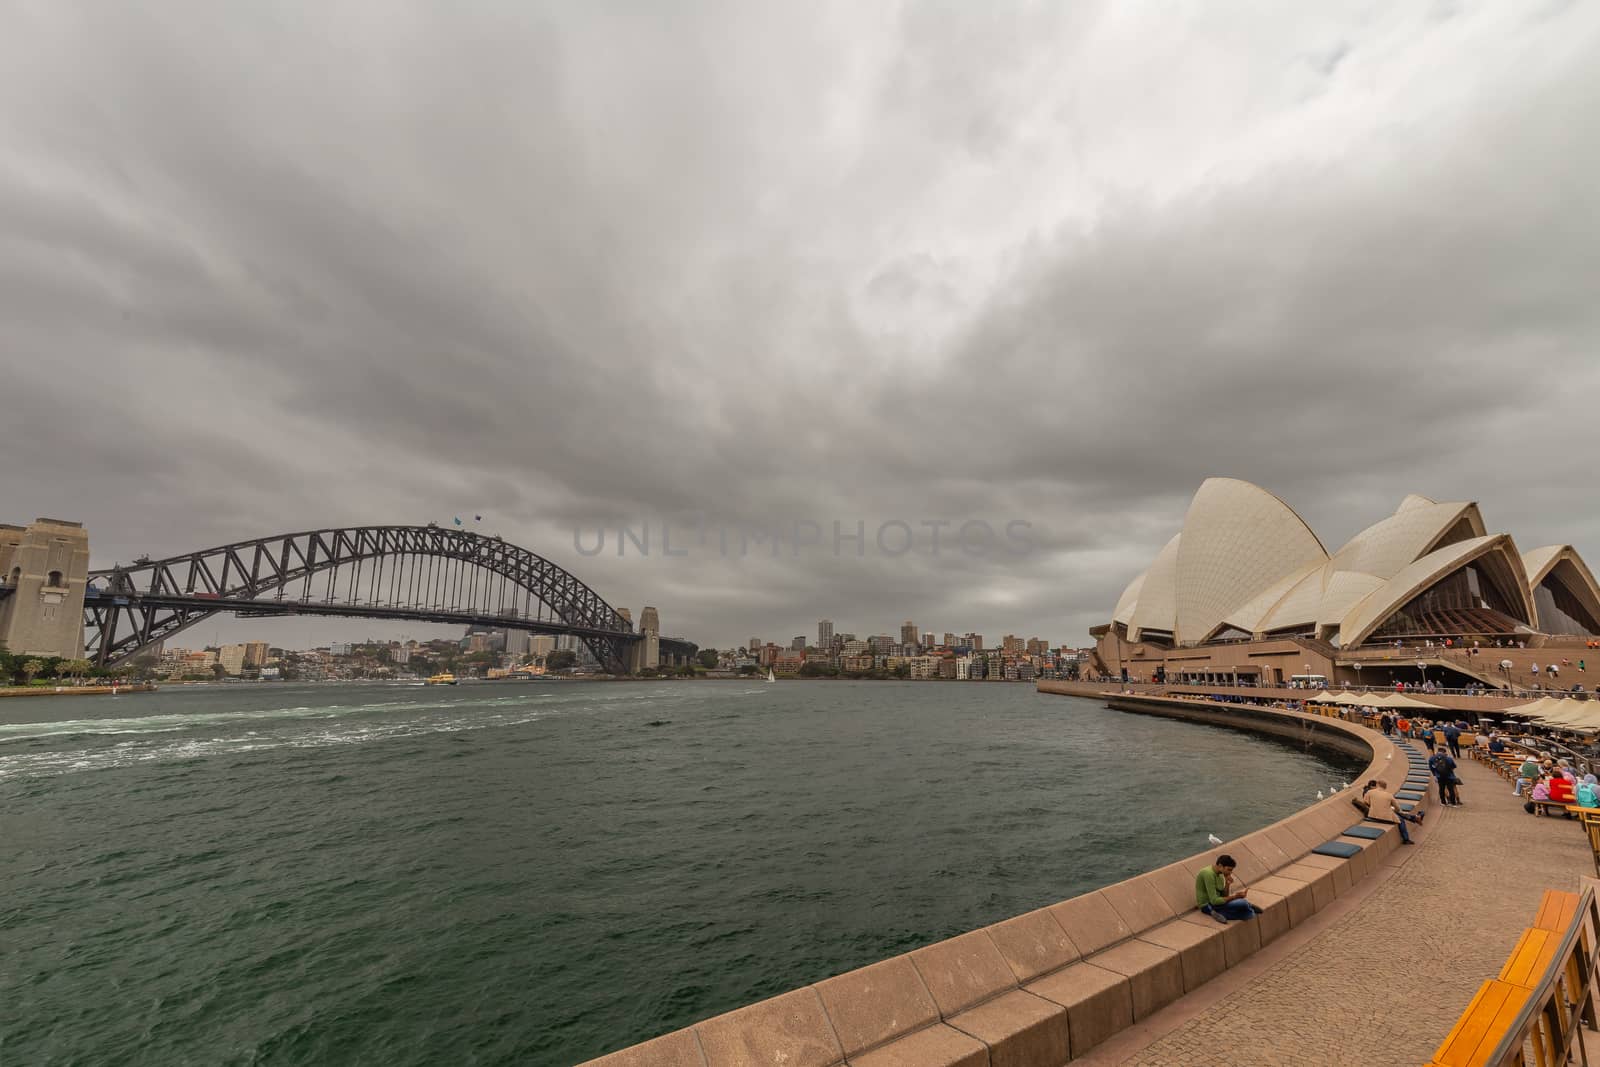 Sydney Harbor, Australia - October 23, 2018: Panoramic view of Sydney downtown, harbor bridge and opera house with boats sailing in the bay. Gloomy, cloudy sky.